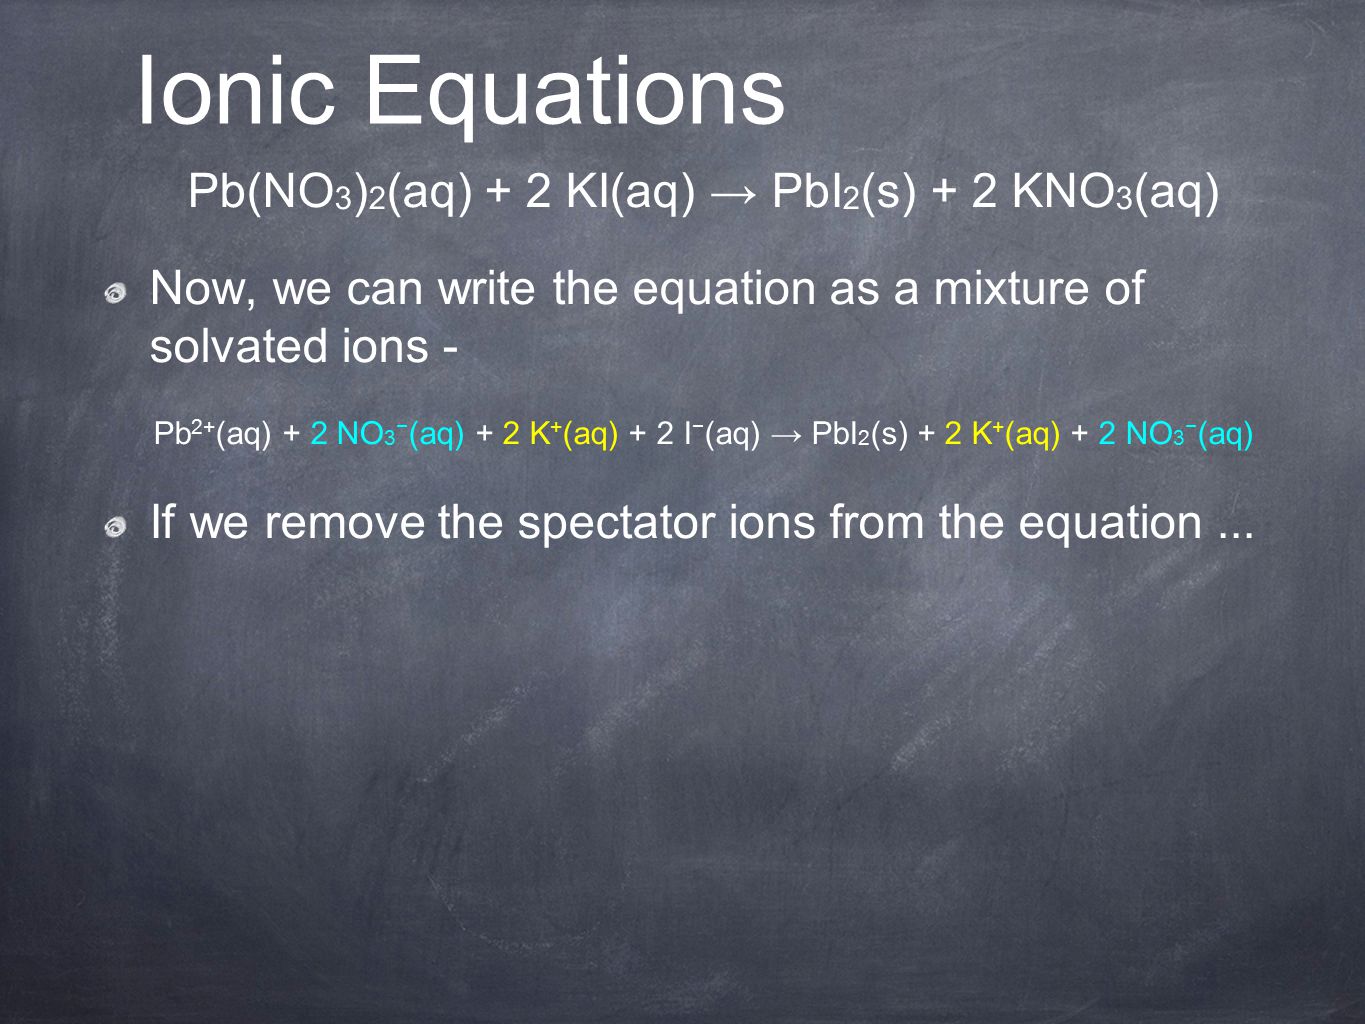 Pb(NO 3 ) 2 (aq) + 2 KI(aq) → PbI 2 (s) + 2 KNO 3 (aq) Now, we can write the equation as a mixture of solvated ions - Pb 2+ (aq) + 2 NO 3 − (aq) + 2 K + (aq) + 2 I − (aq) → PbI 2 (s) + 2 K + (aq) + 2 NO 3 − (aq) If we remove the spectator ions from the equation...